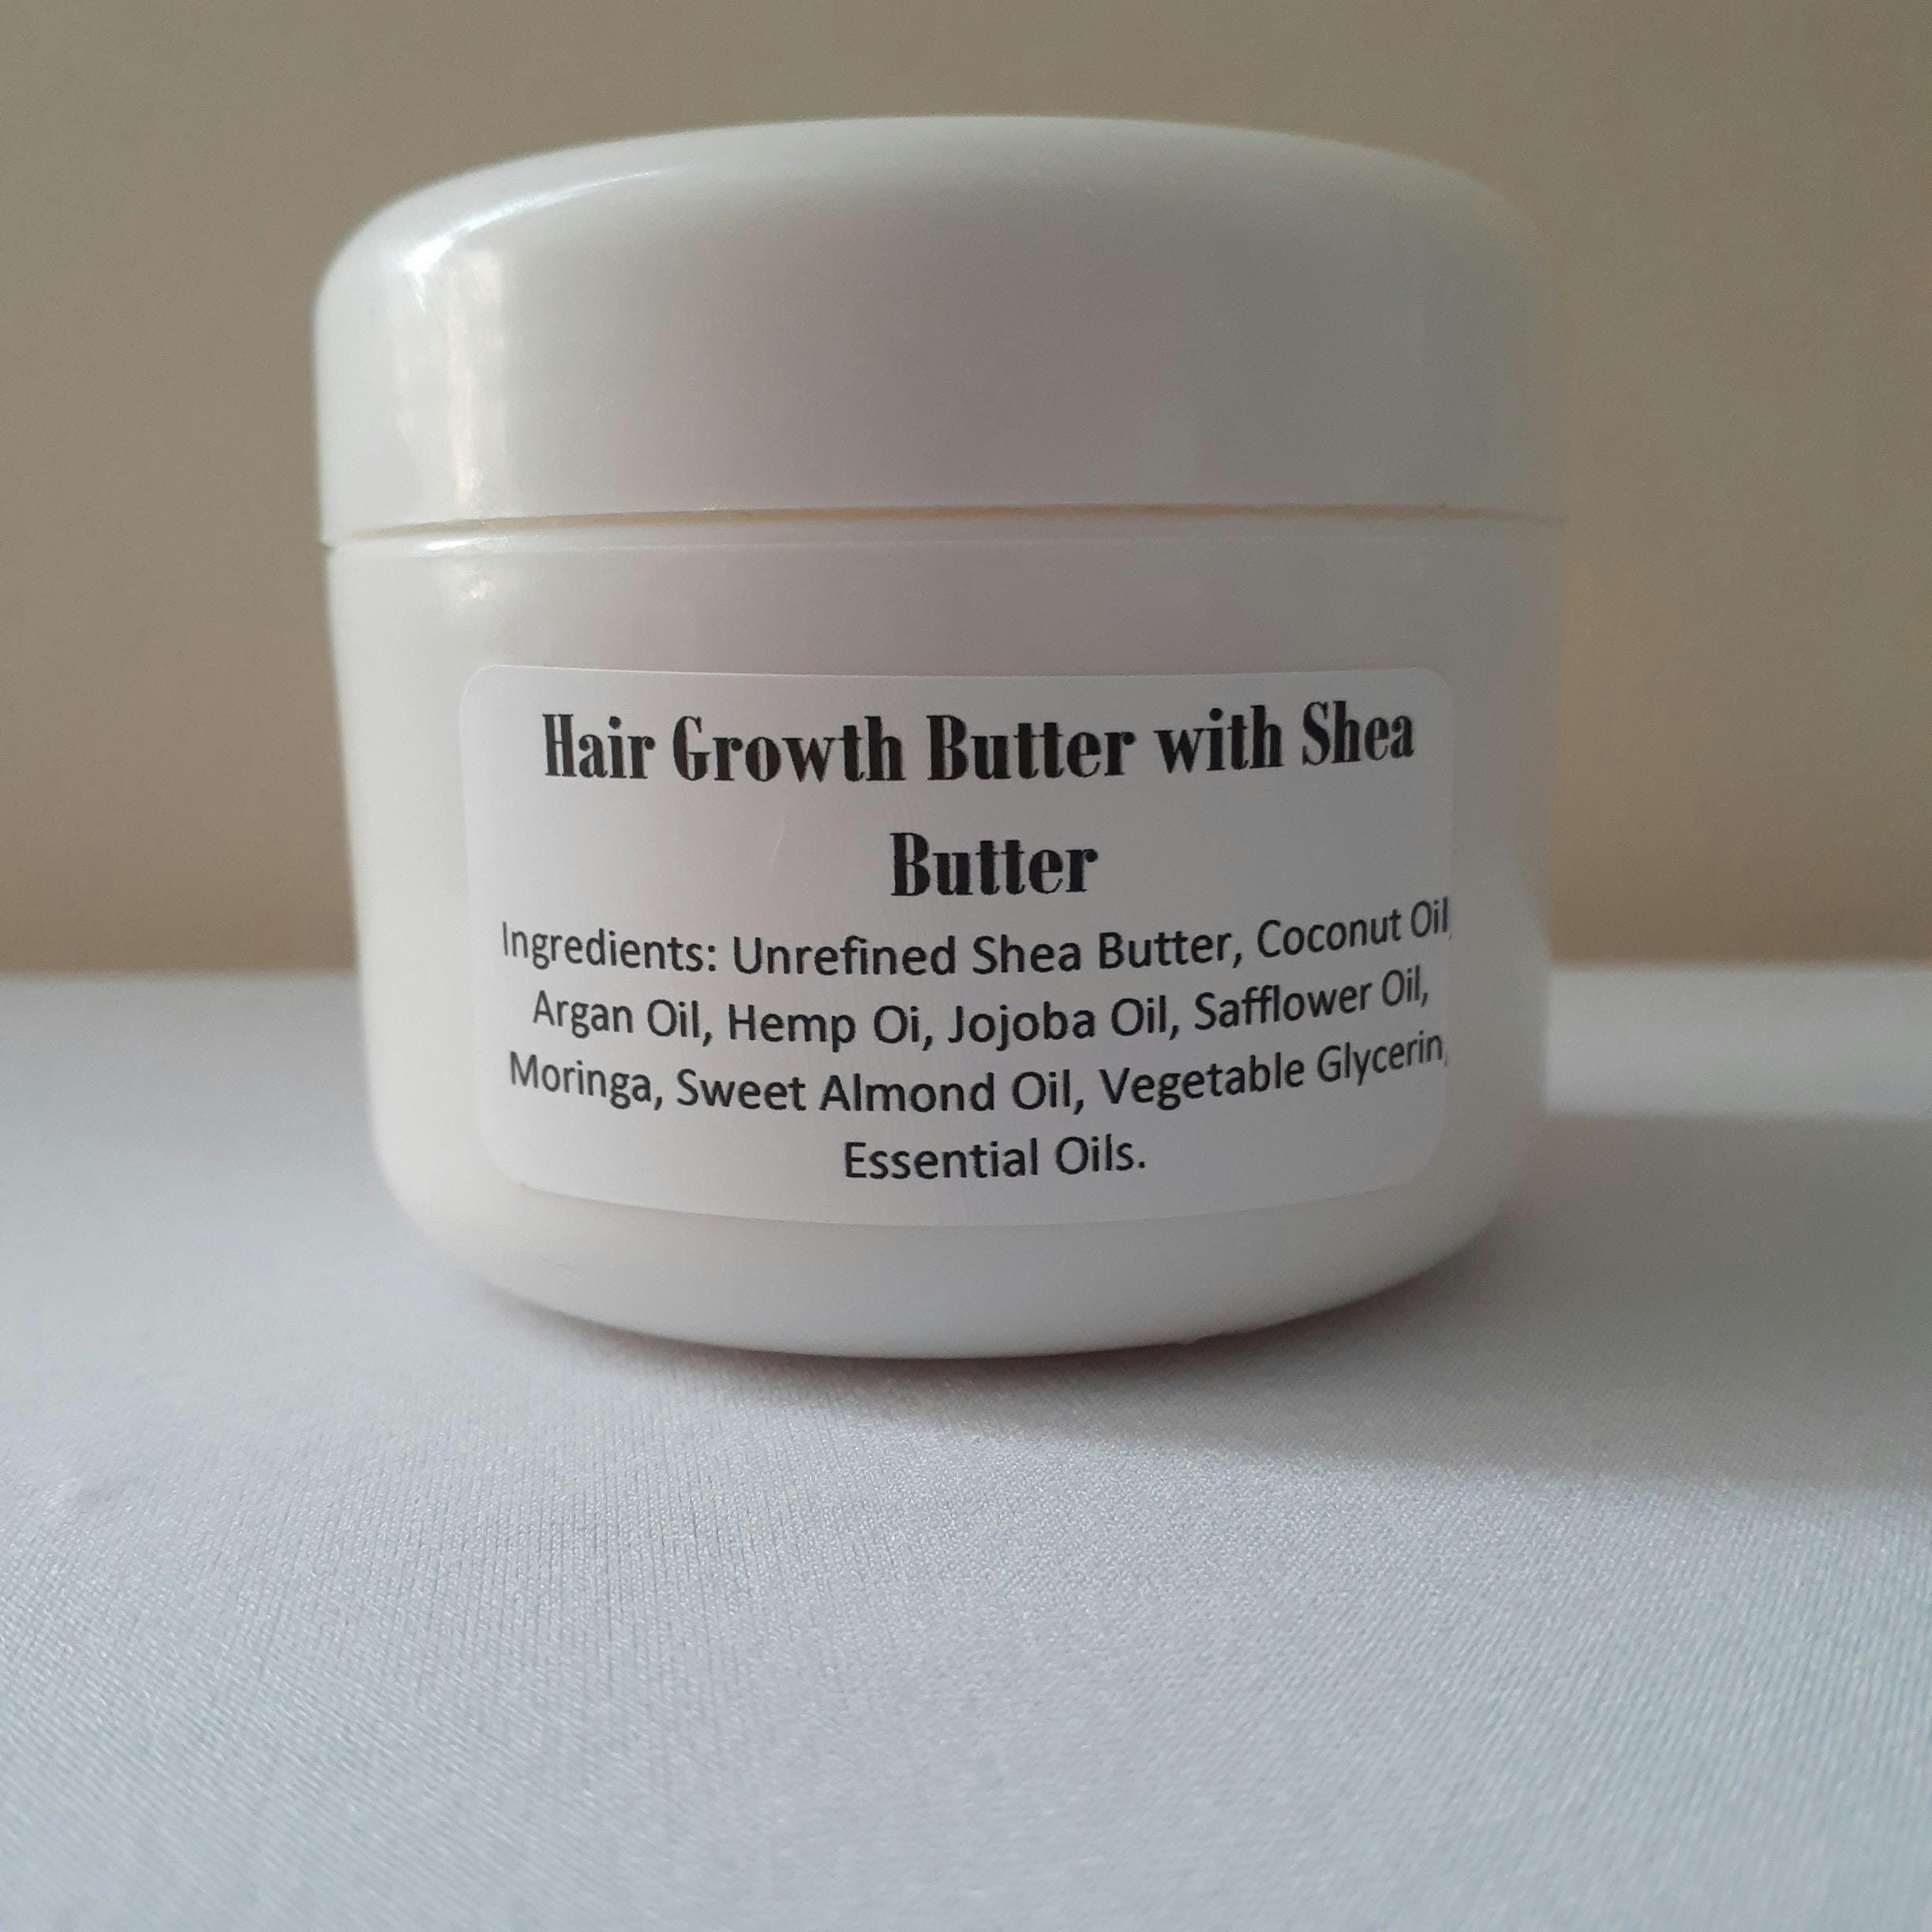 Hair Growth Butter with Shea Butter